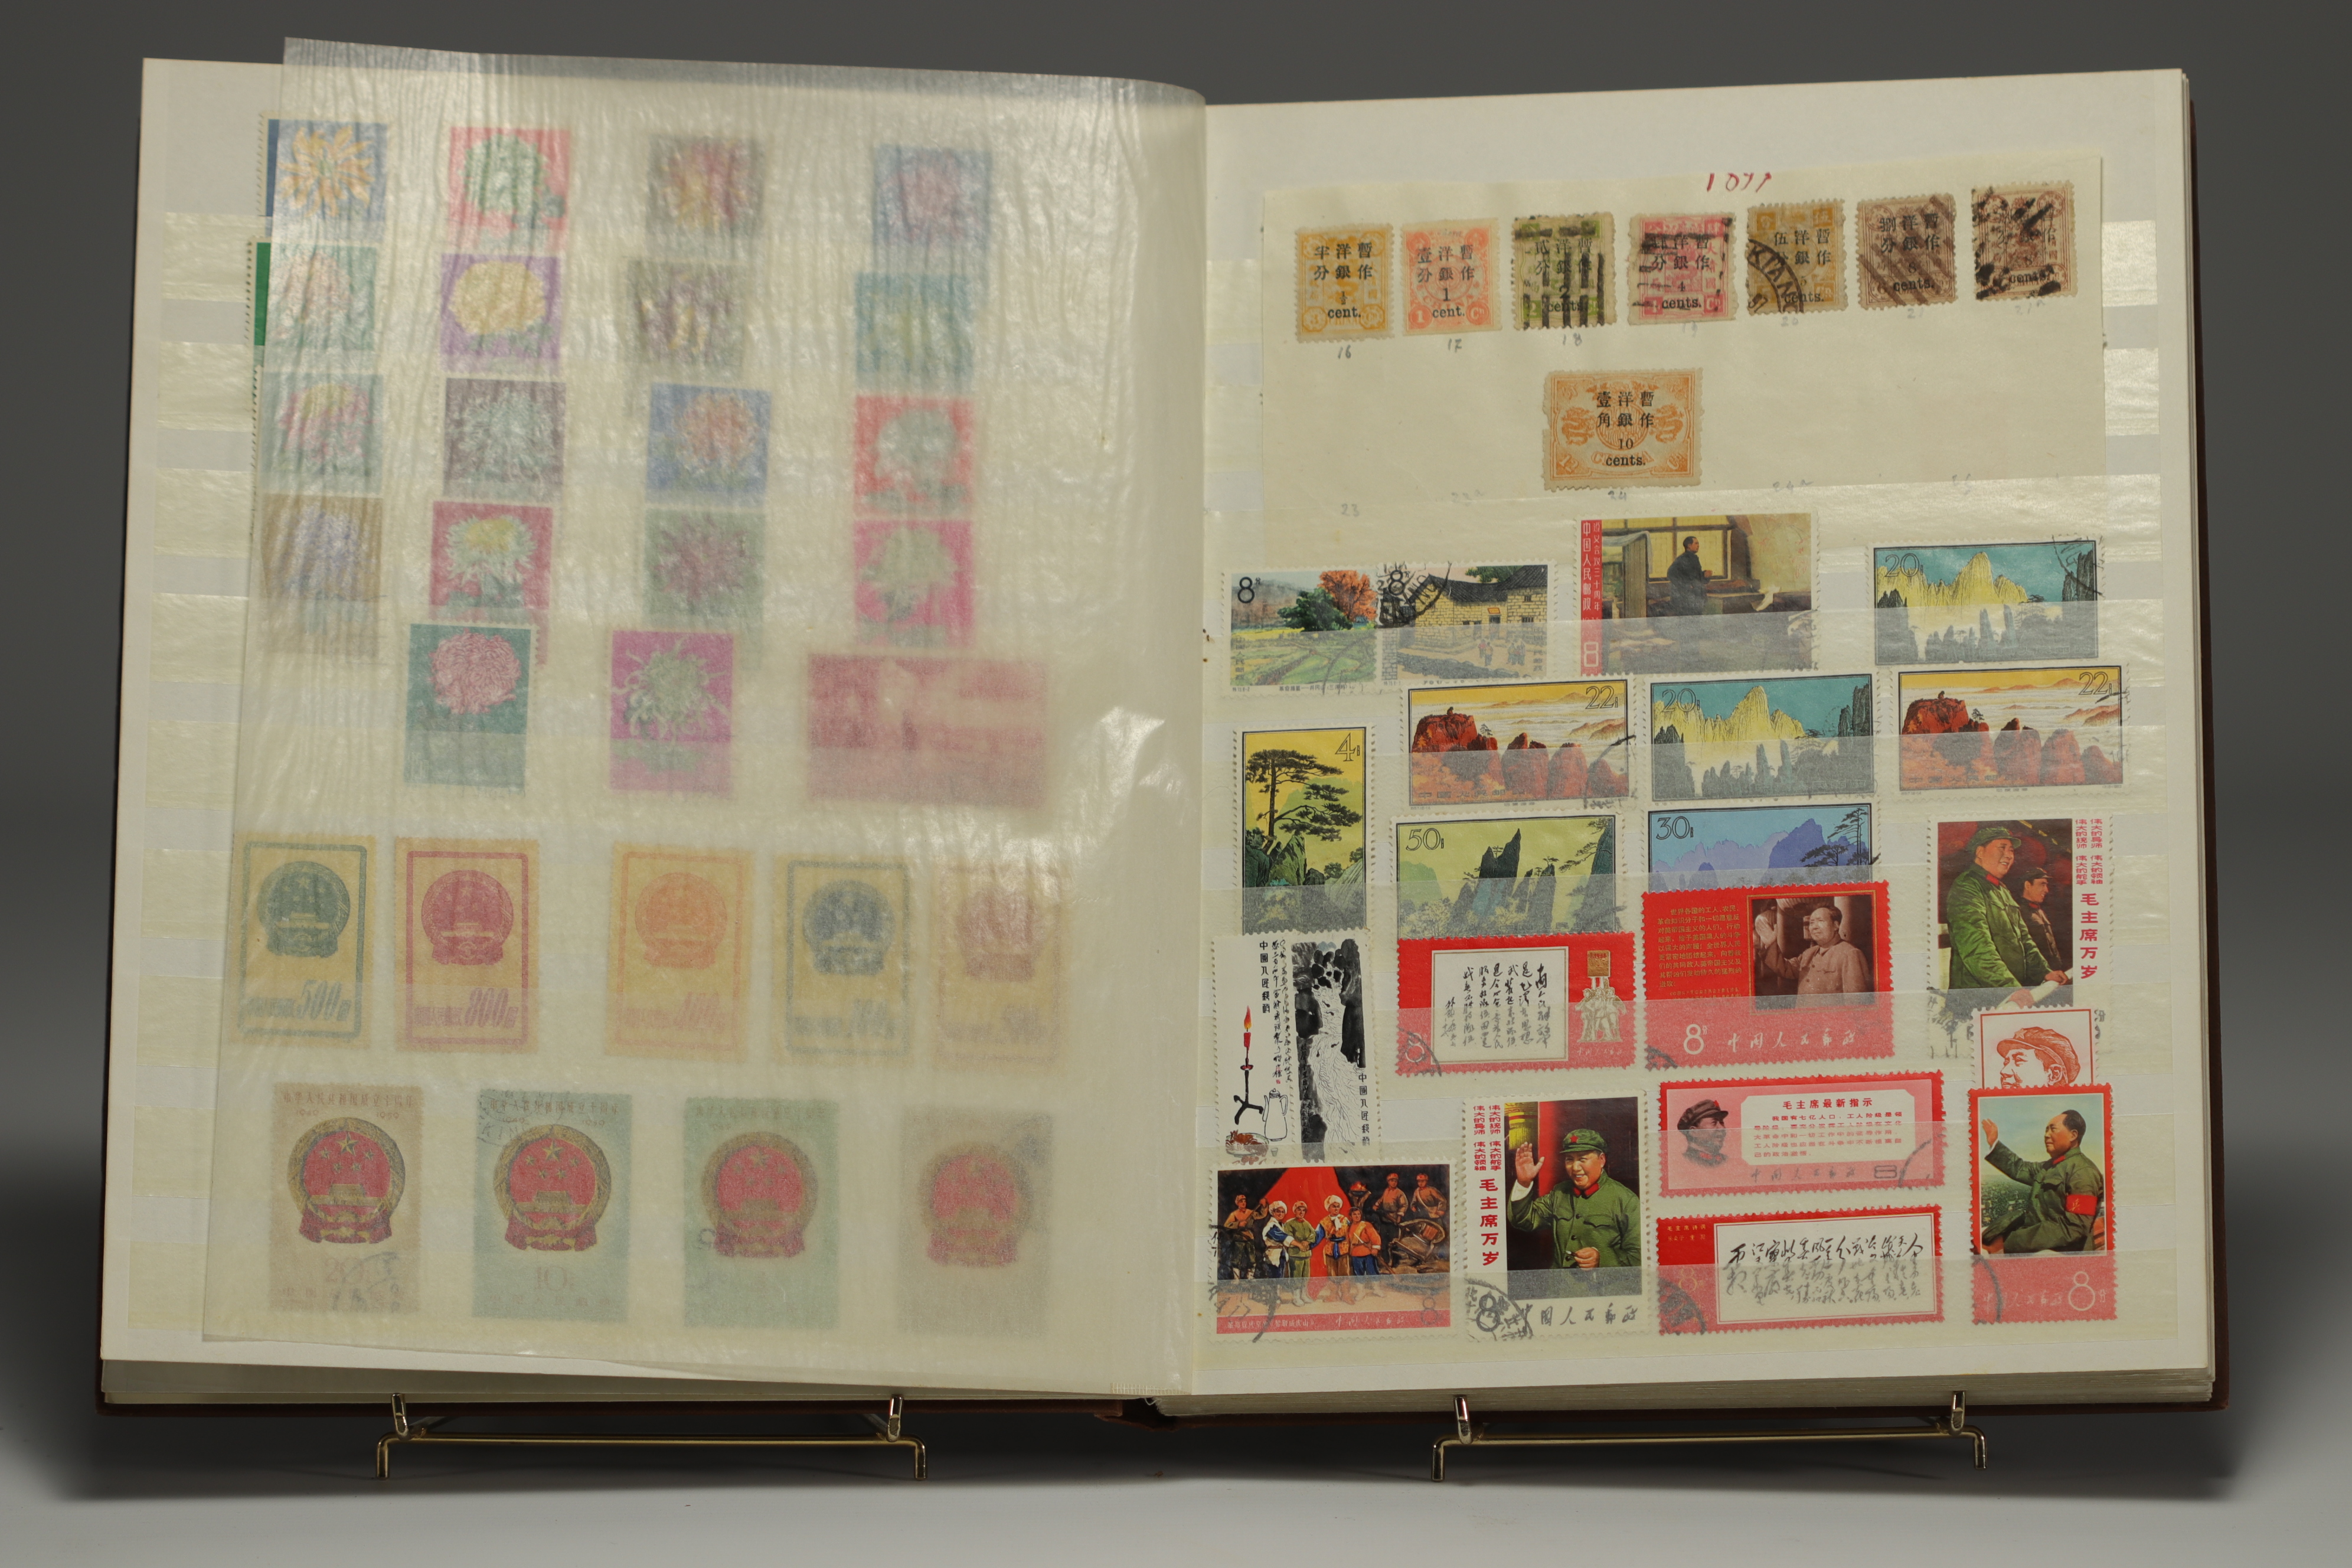 Set of 30 albums of world stamps, China, Japan, Middle East, Europe, etc. (Lot 2) - Image 18 of 22